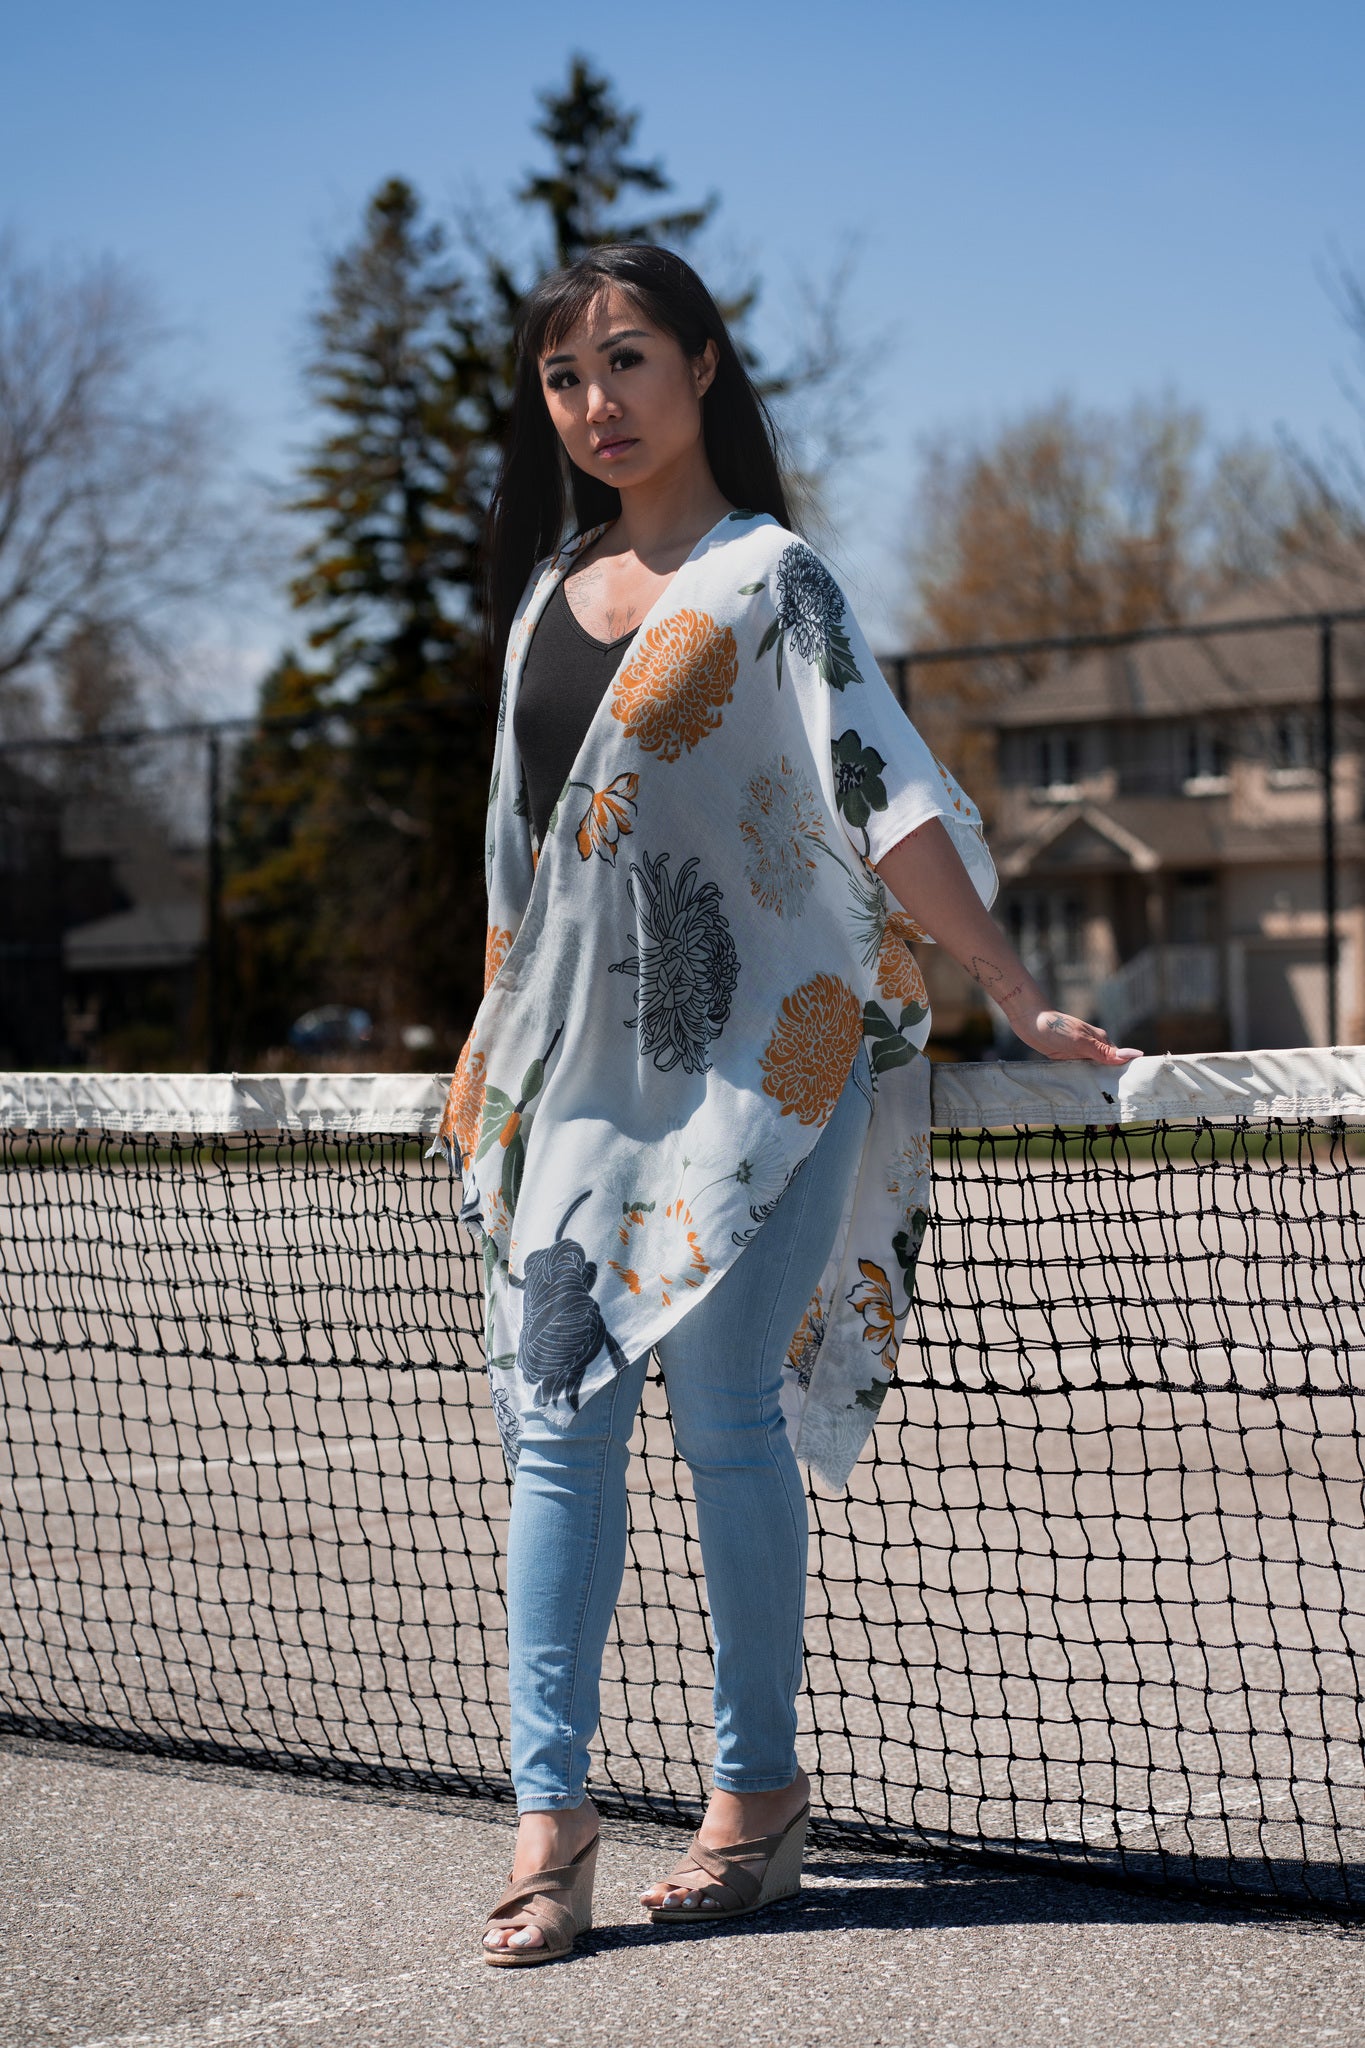 Woman wearing white floral beach cover up standing in front of tennis court wearing black bamboo tank and jeans and sandals